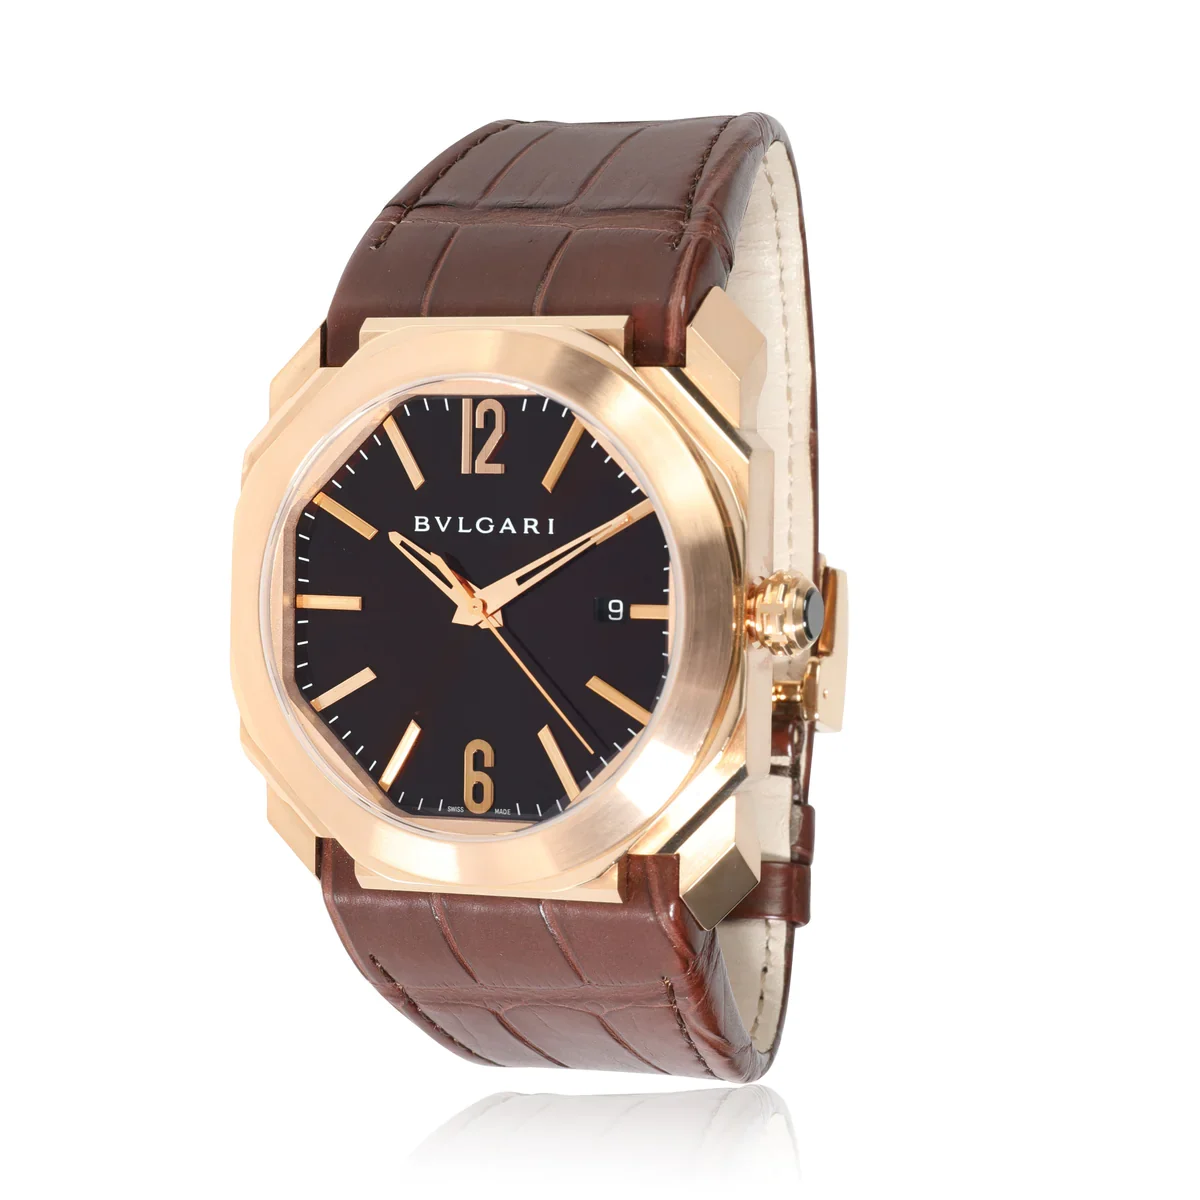 Bvlgari Octo Solotempo Criollo 41 Rose Gold / Brown / Arabic / Strap - Limited to 130 Pieces 102250 BGO P 41 G Listing Image 1